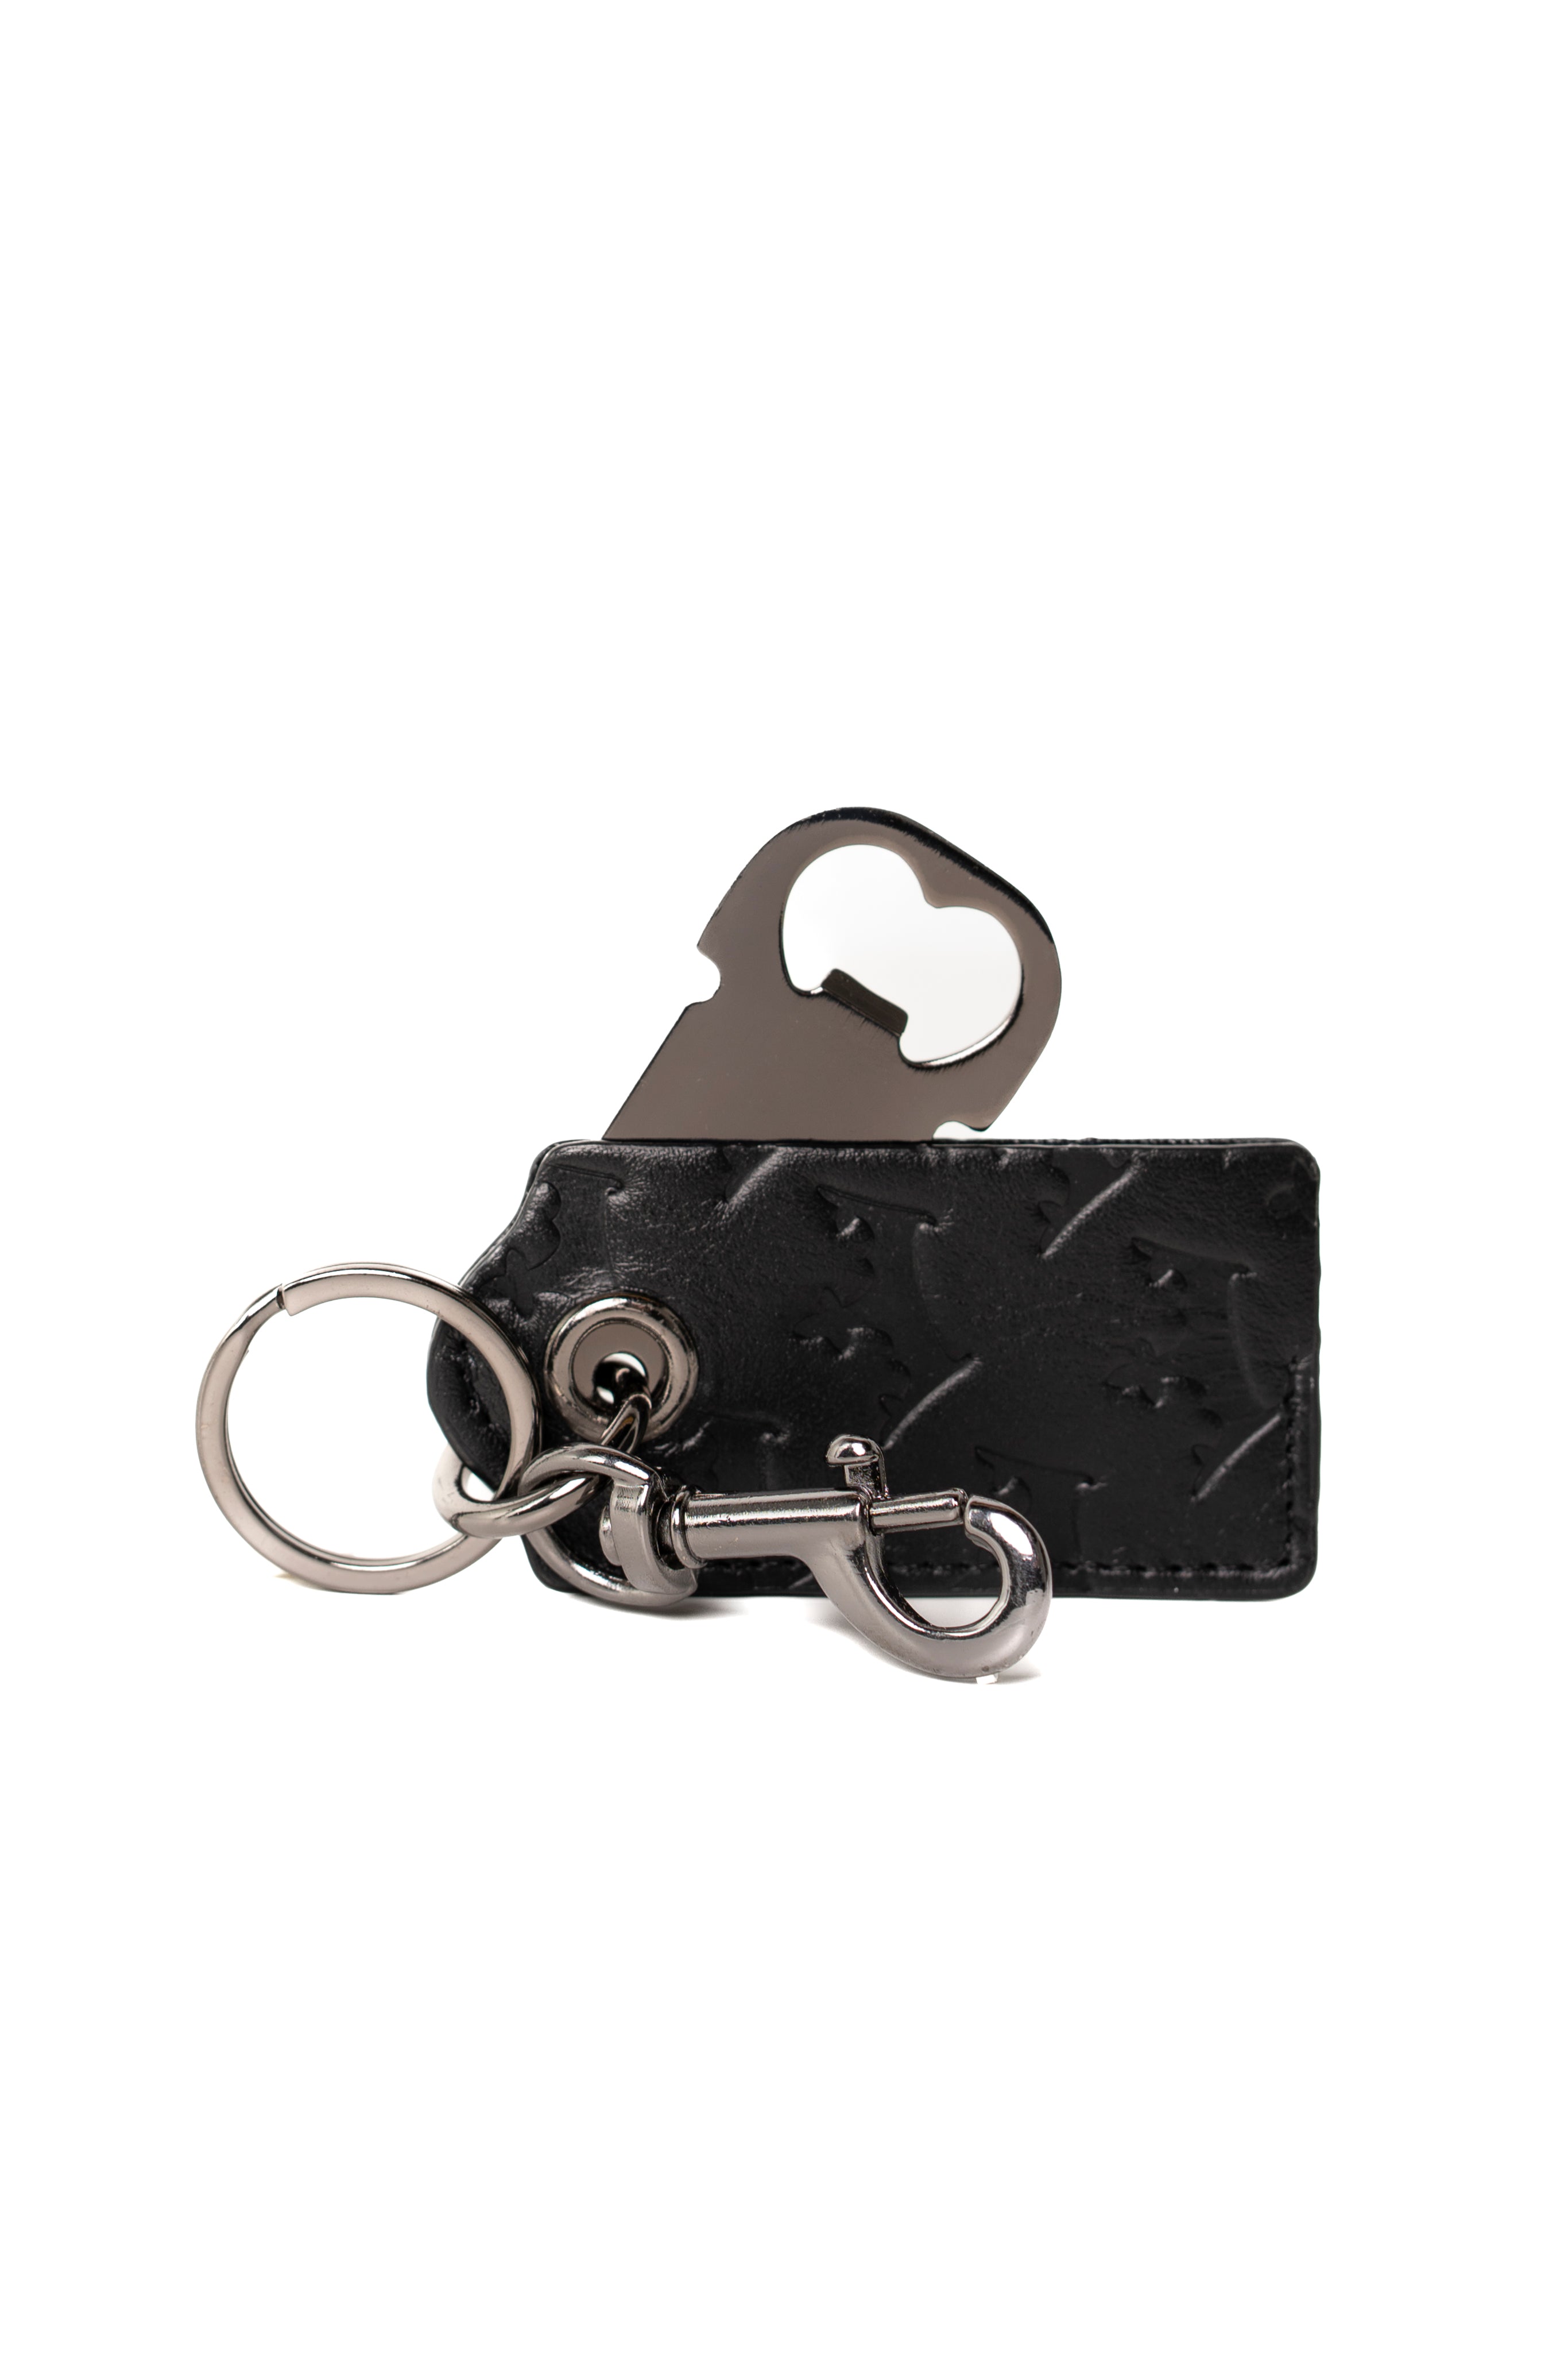 Chicago White Sox Leather Keychain